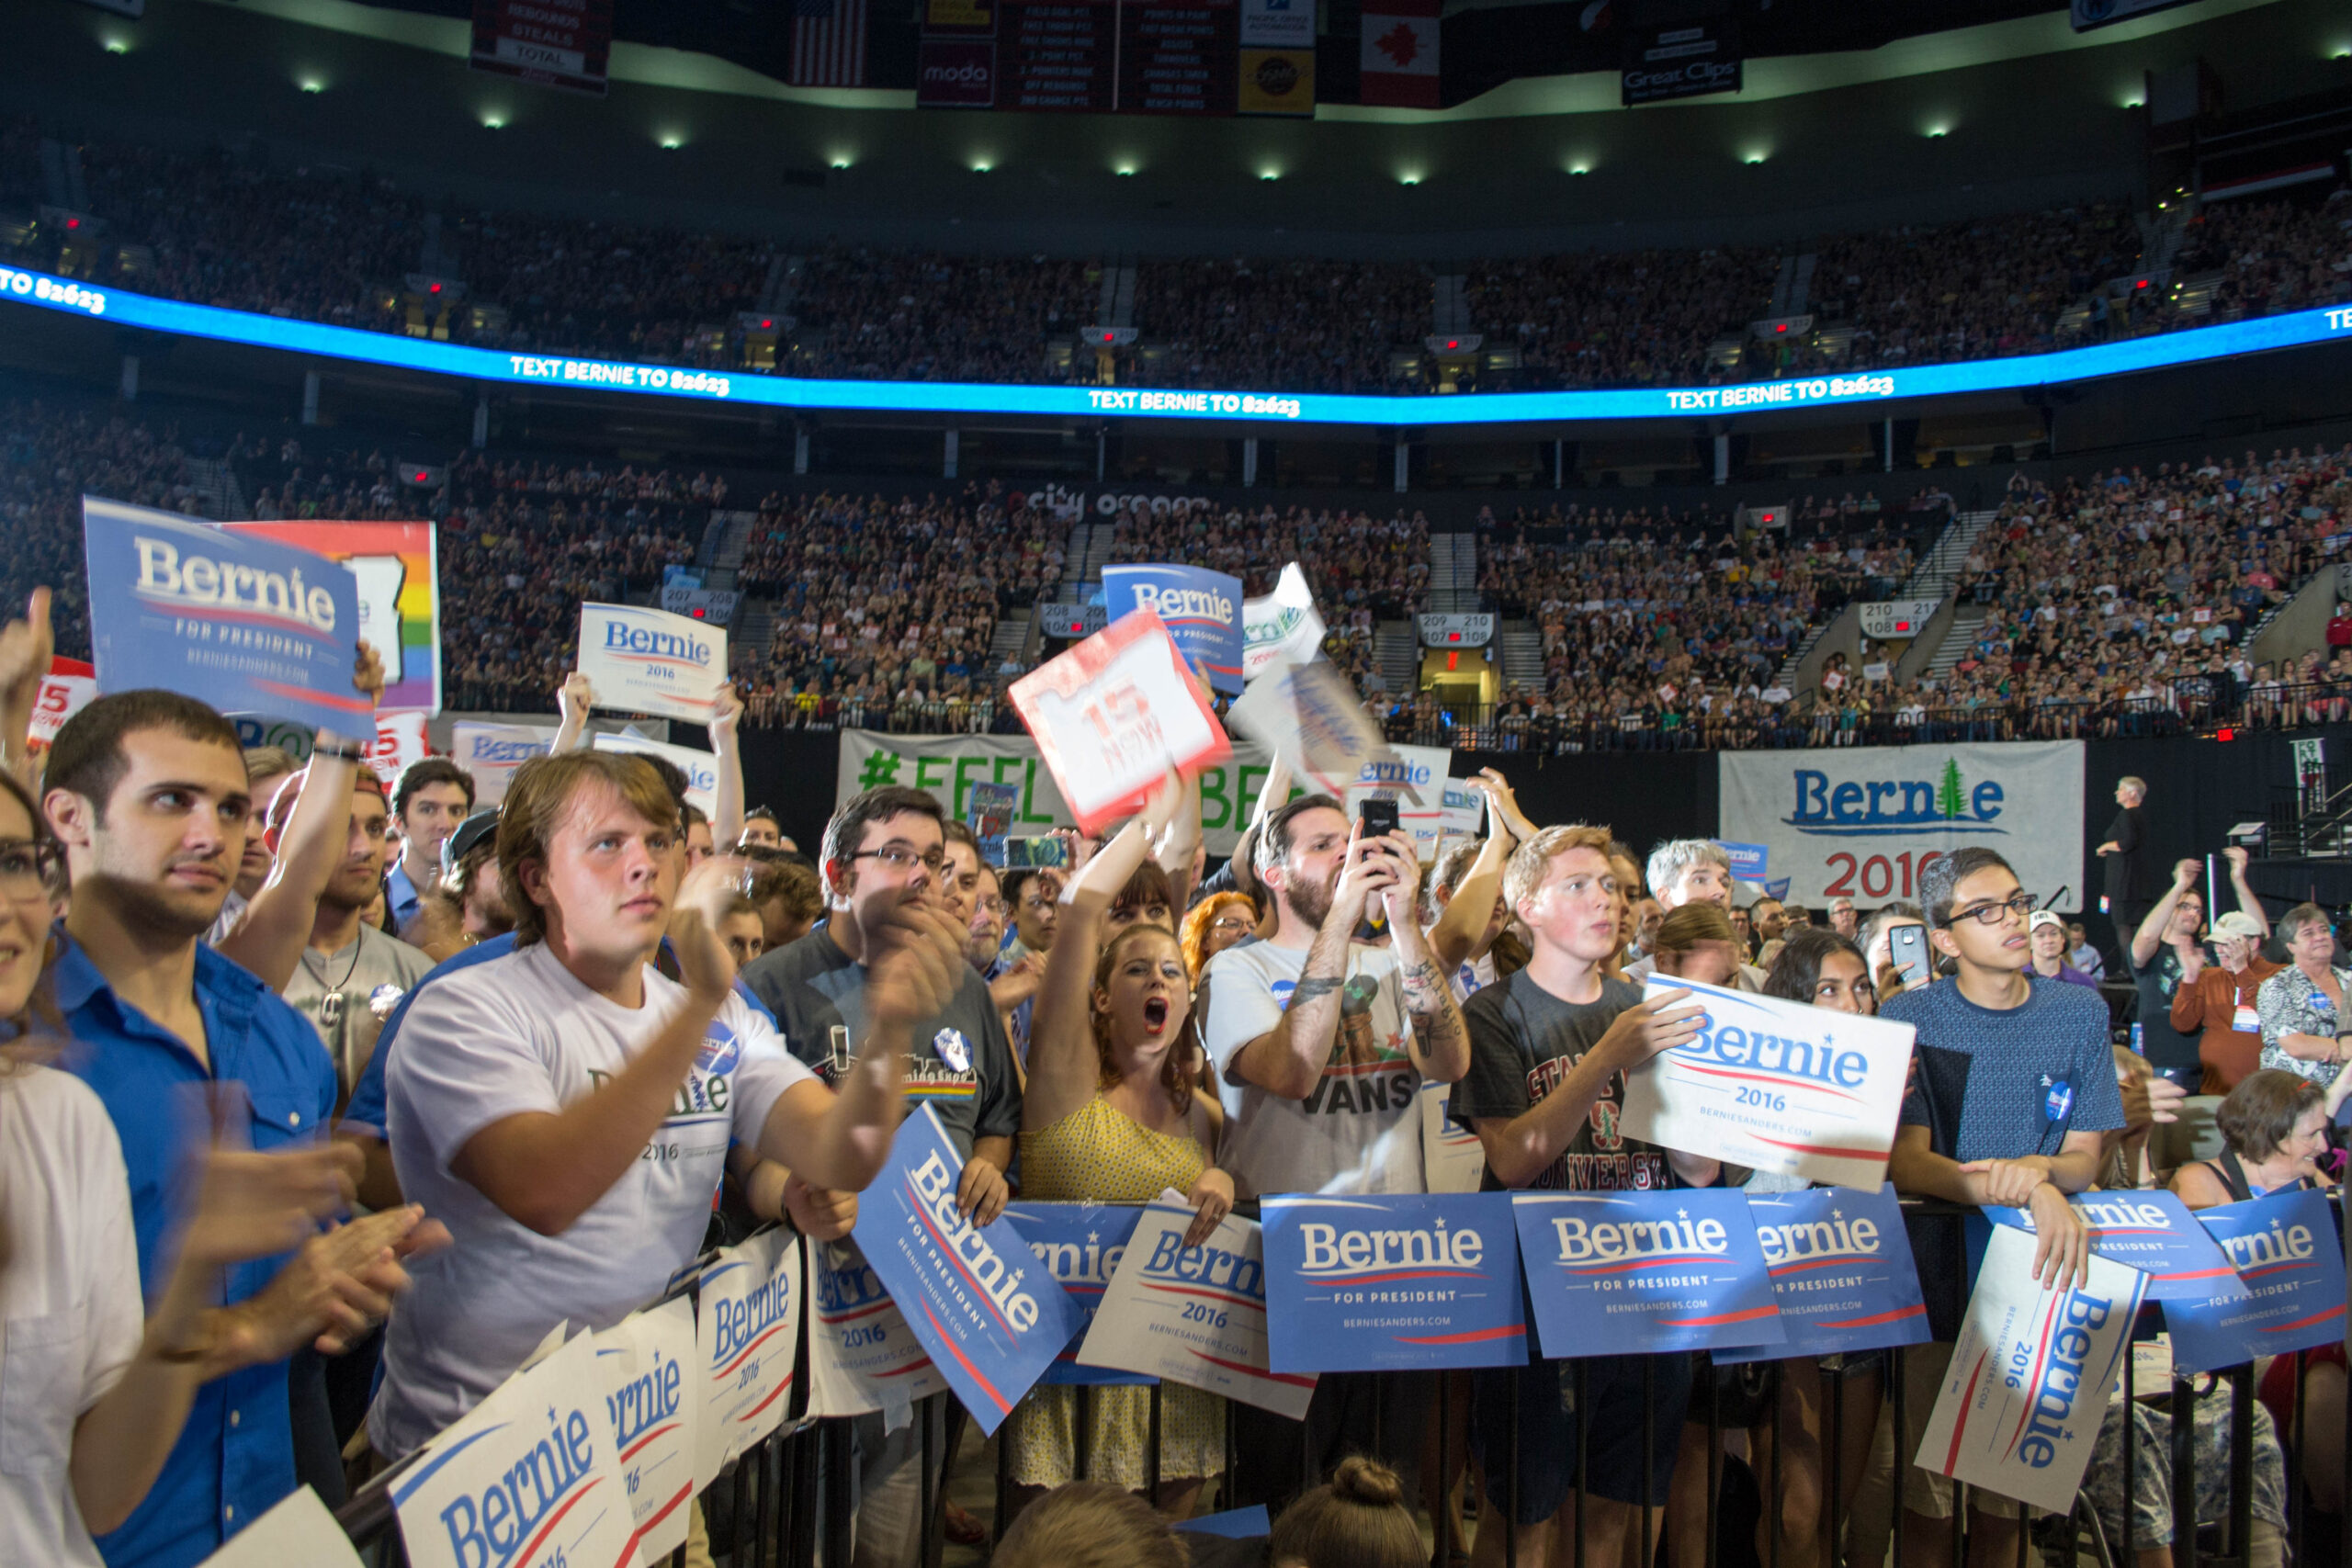 Supporters at a Bernie Sanders rally